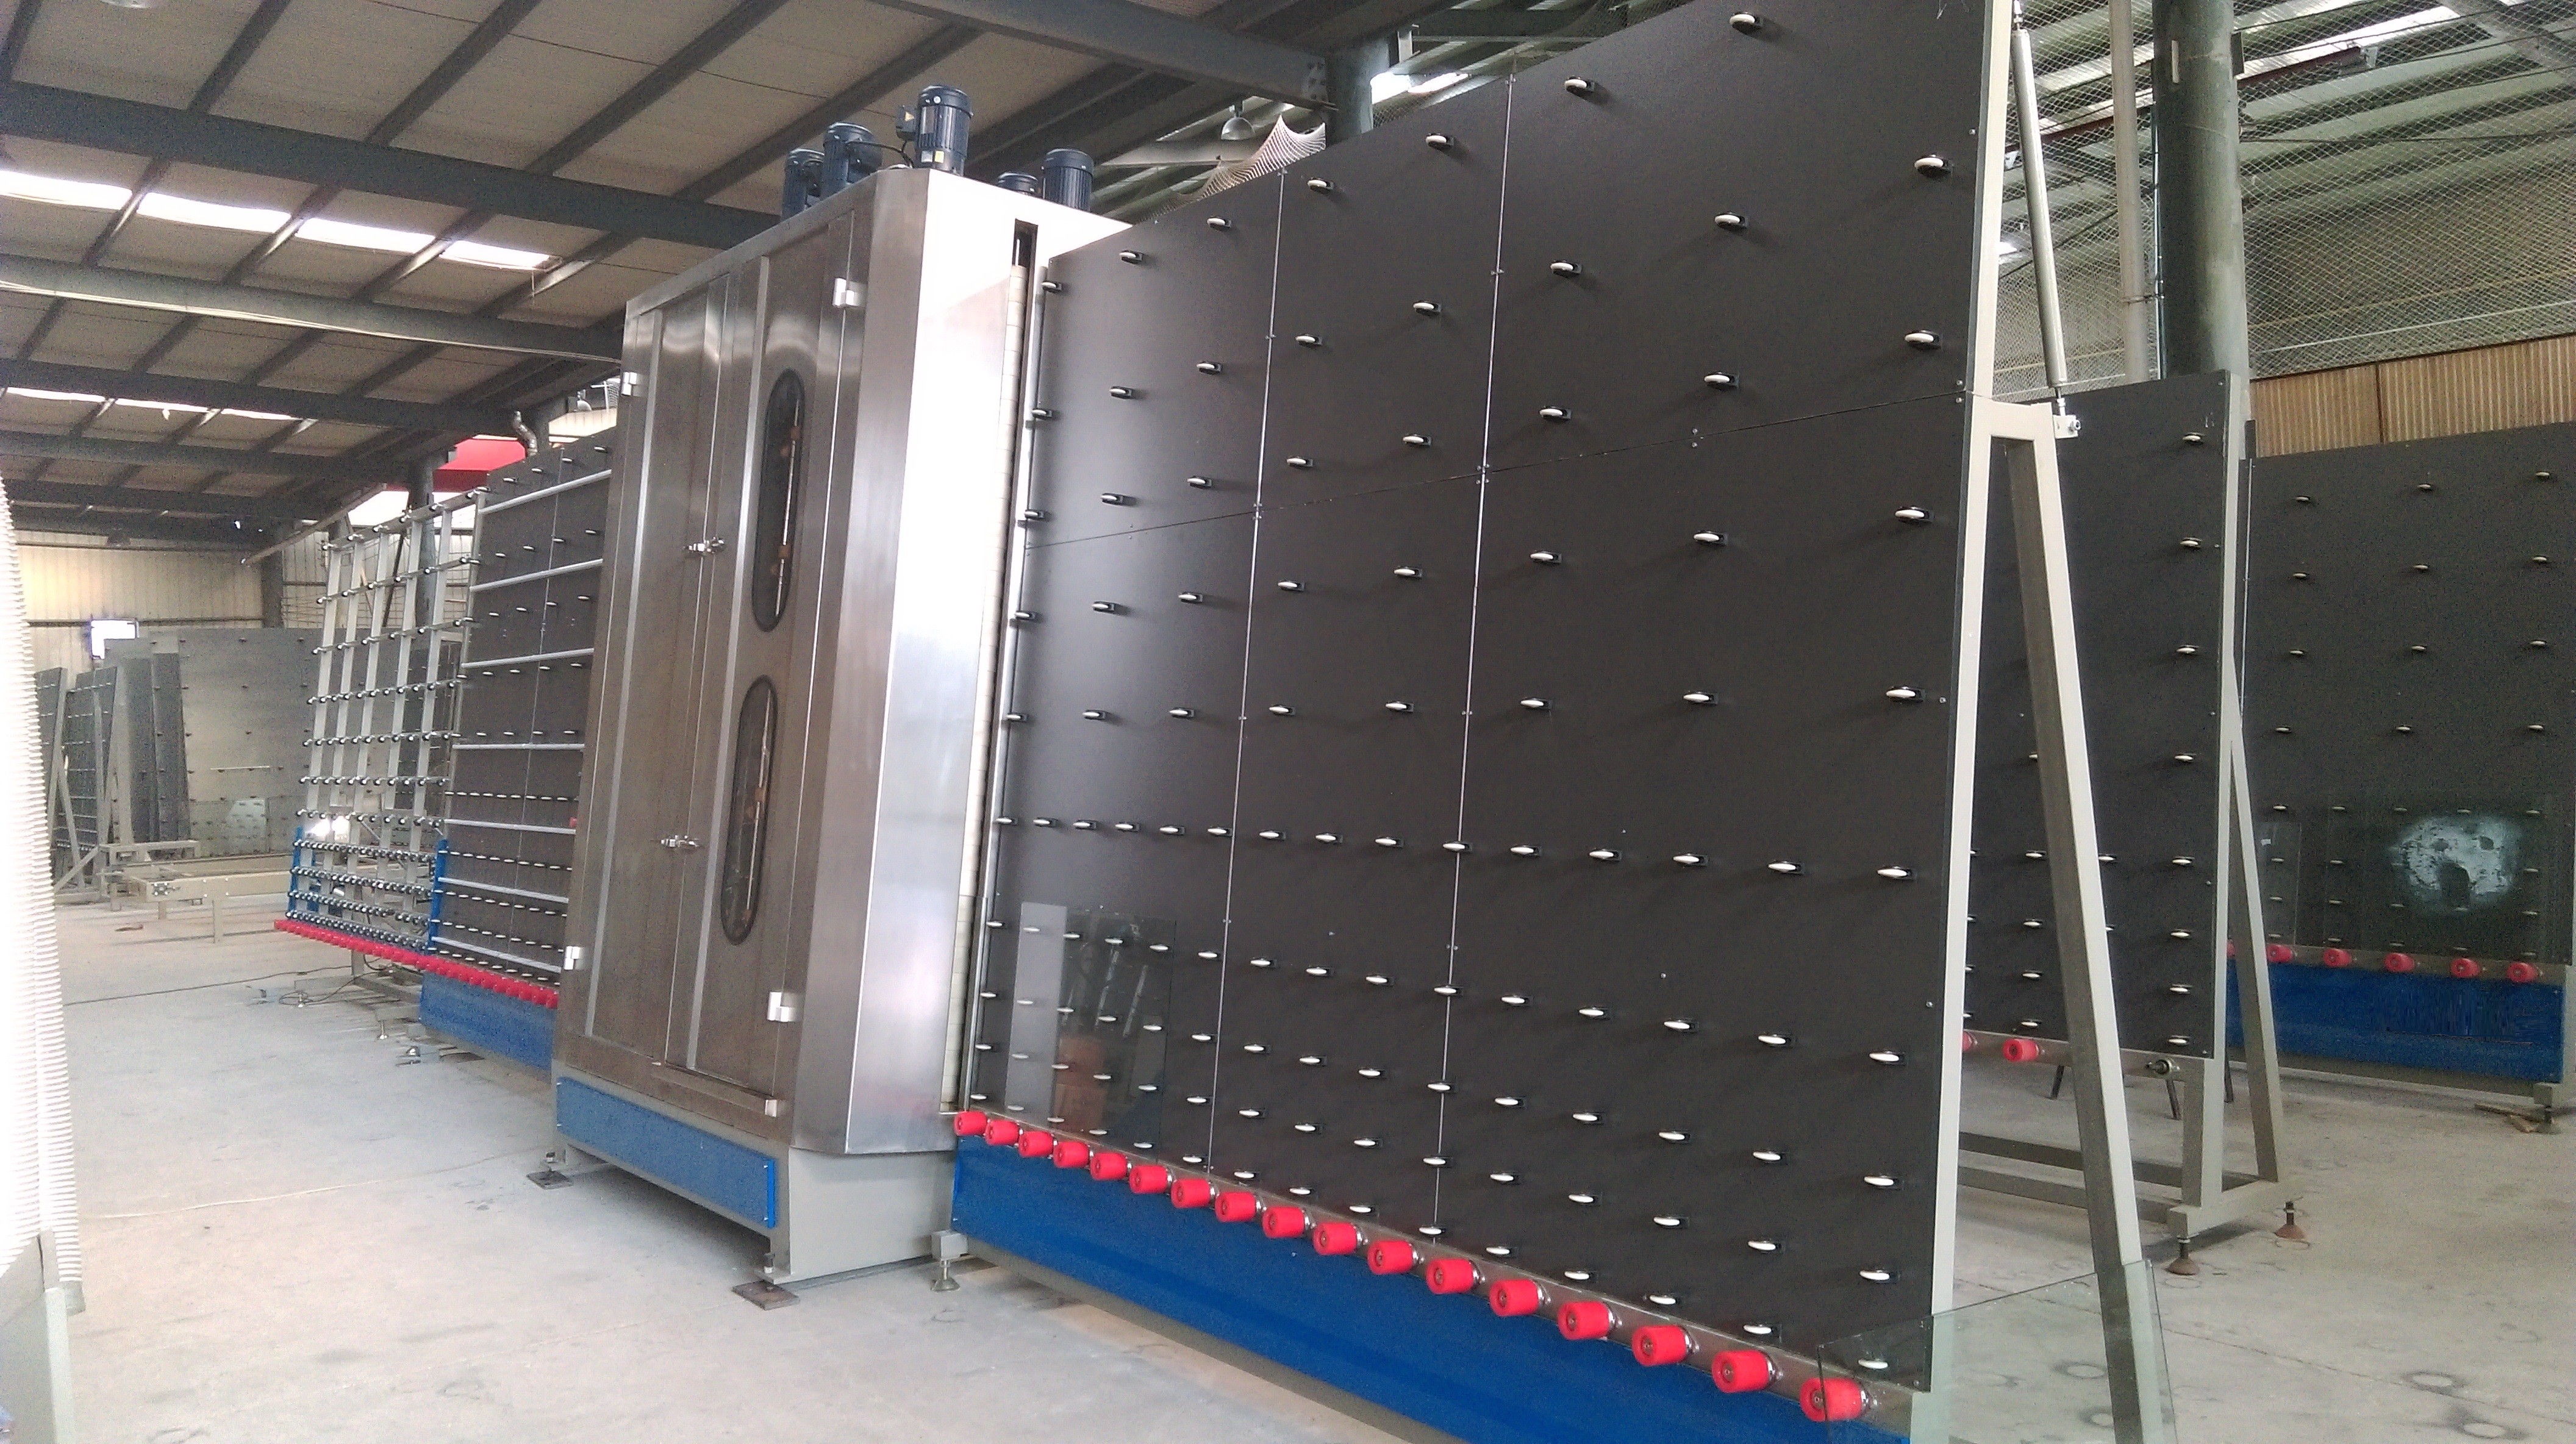 Buy cheap 2500x3000mm Vertical Automatic Flat Glass Washer with Tliting Table product